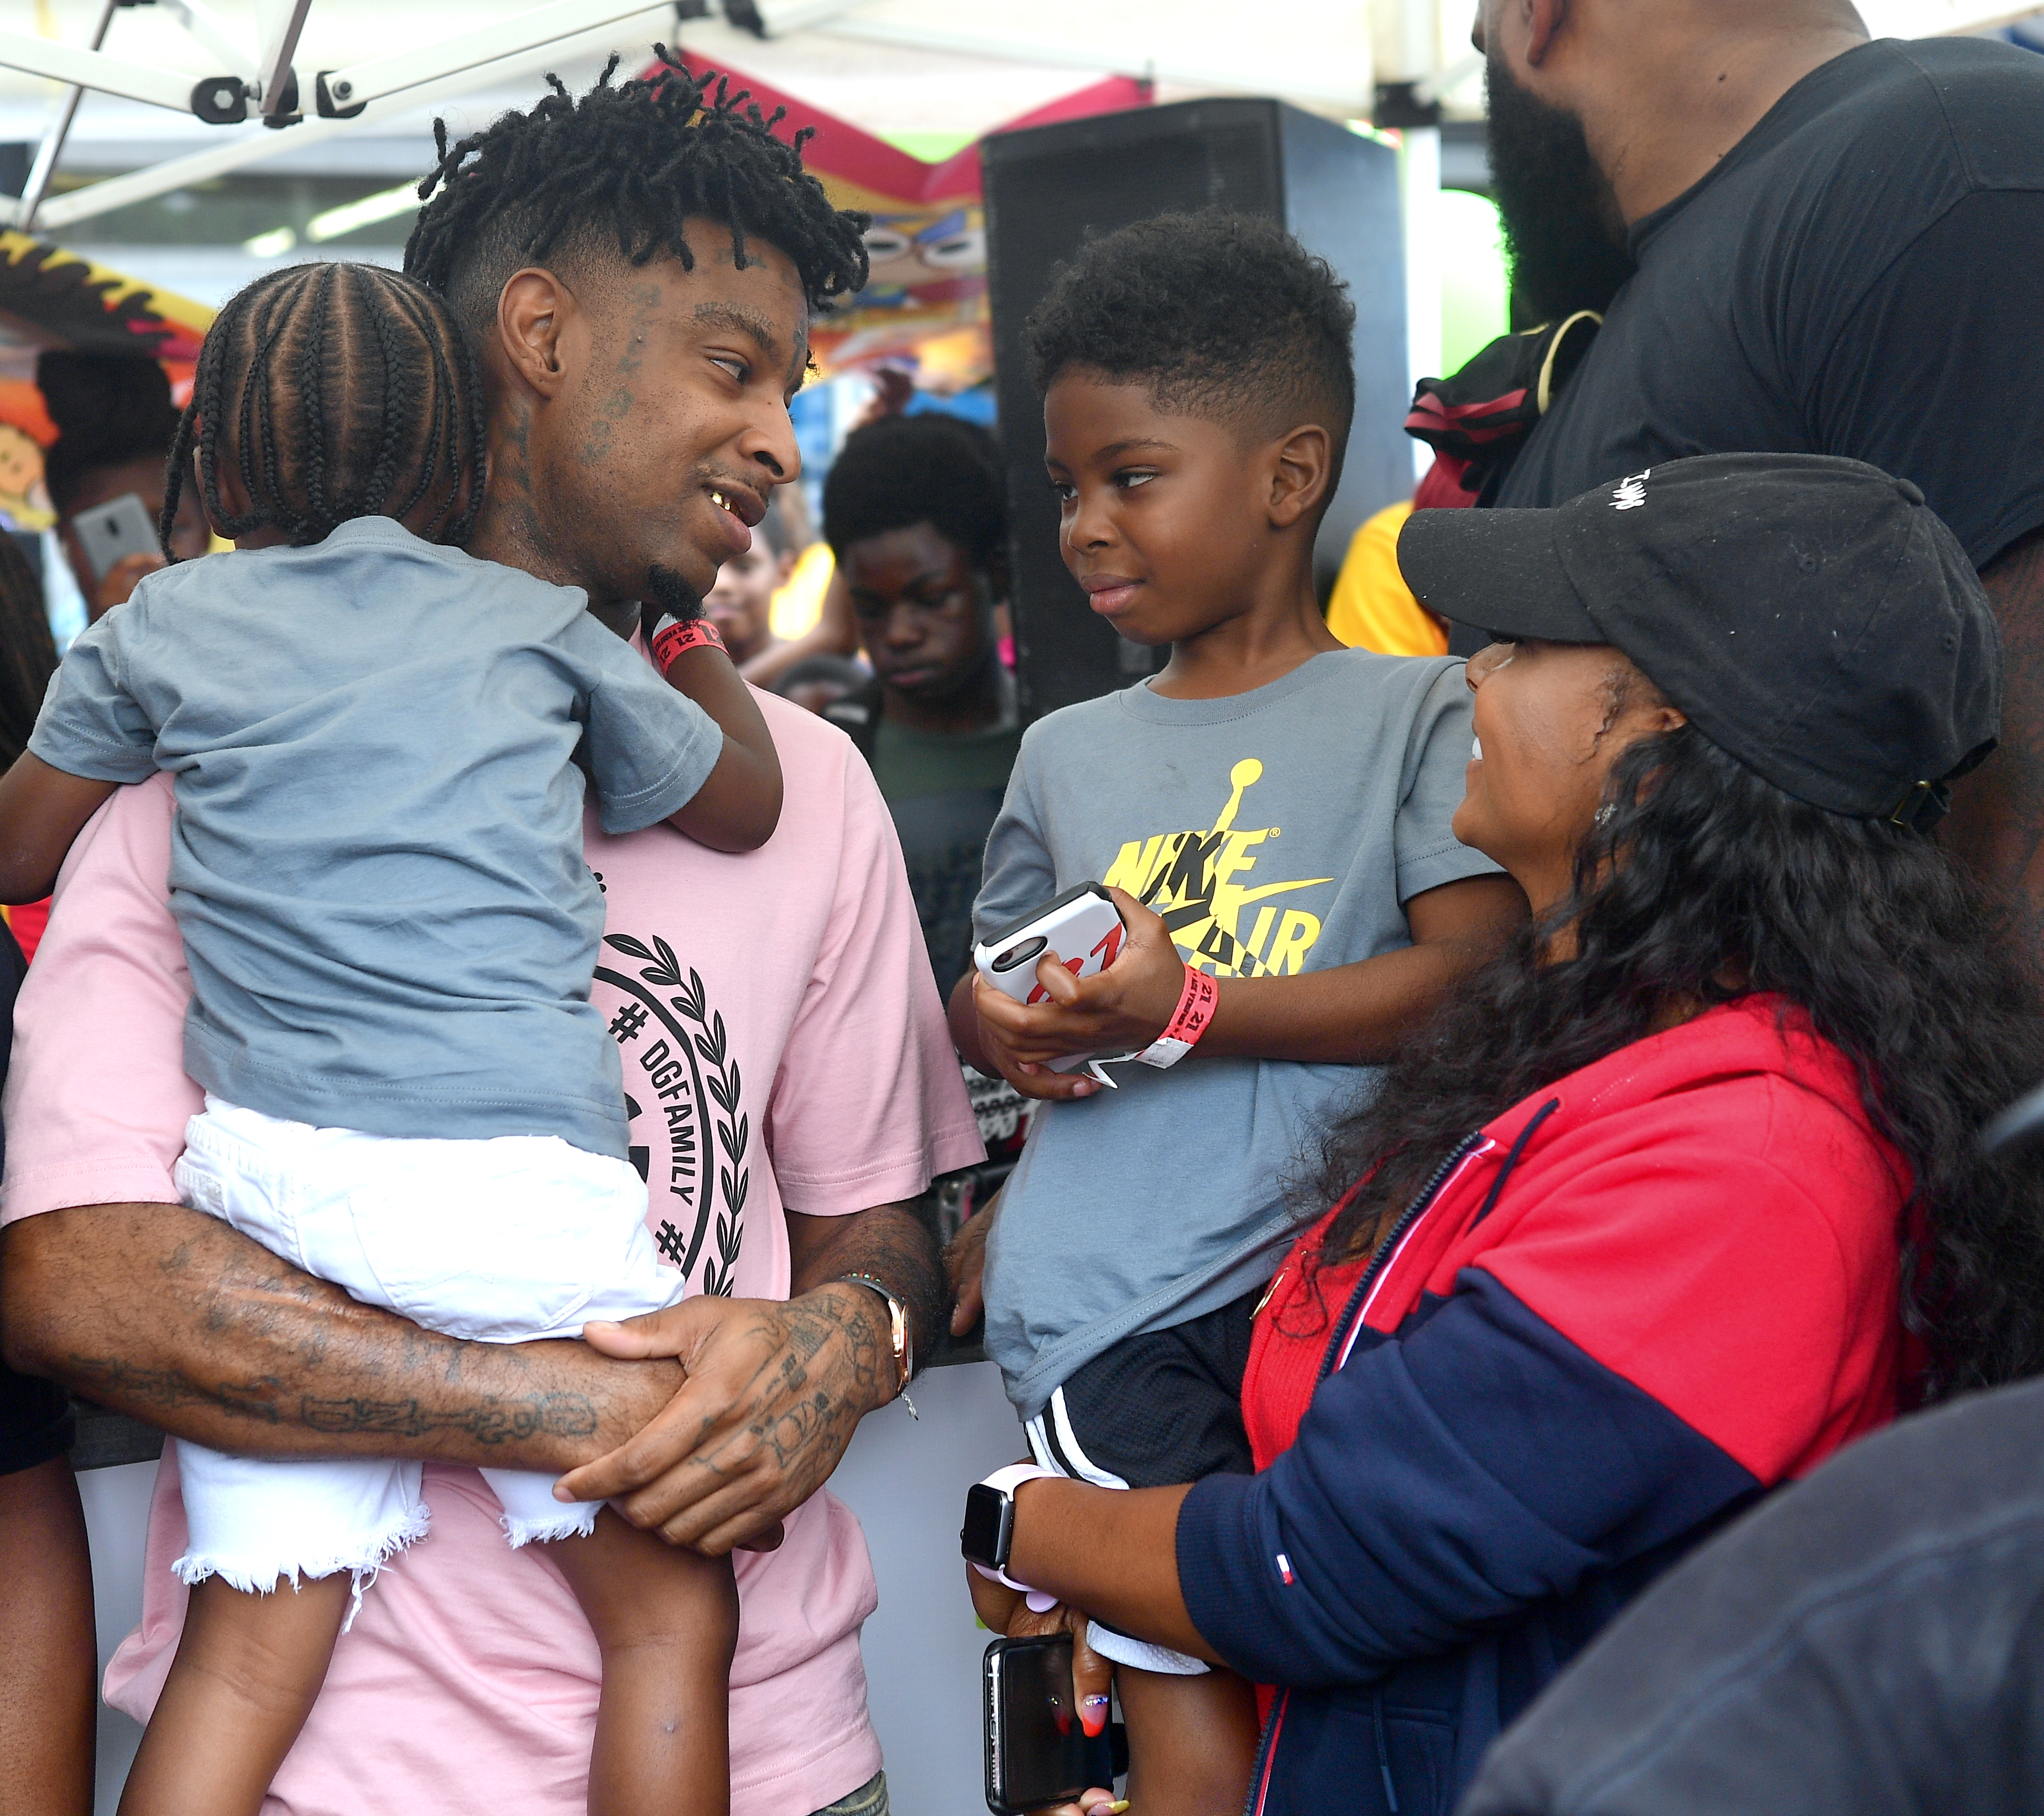 21 Savage Supports 2 300 Kids In Atlanta With Fourth Annual Issa